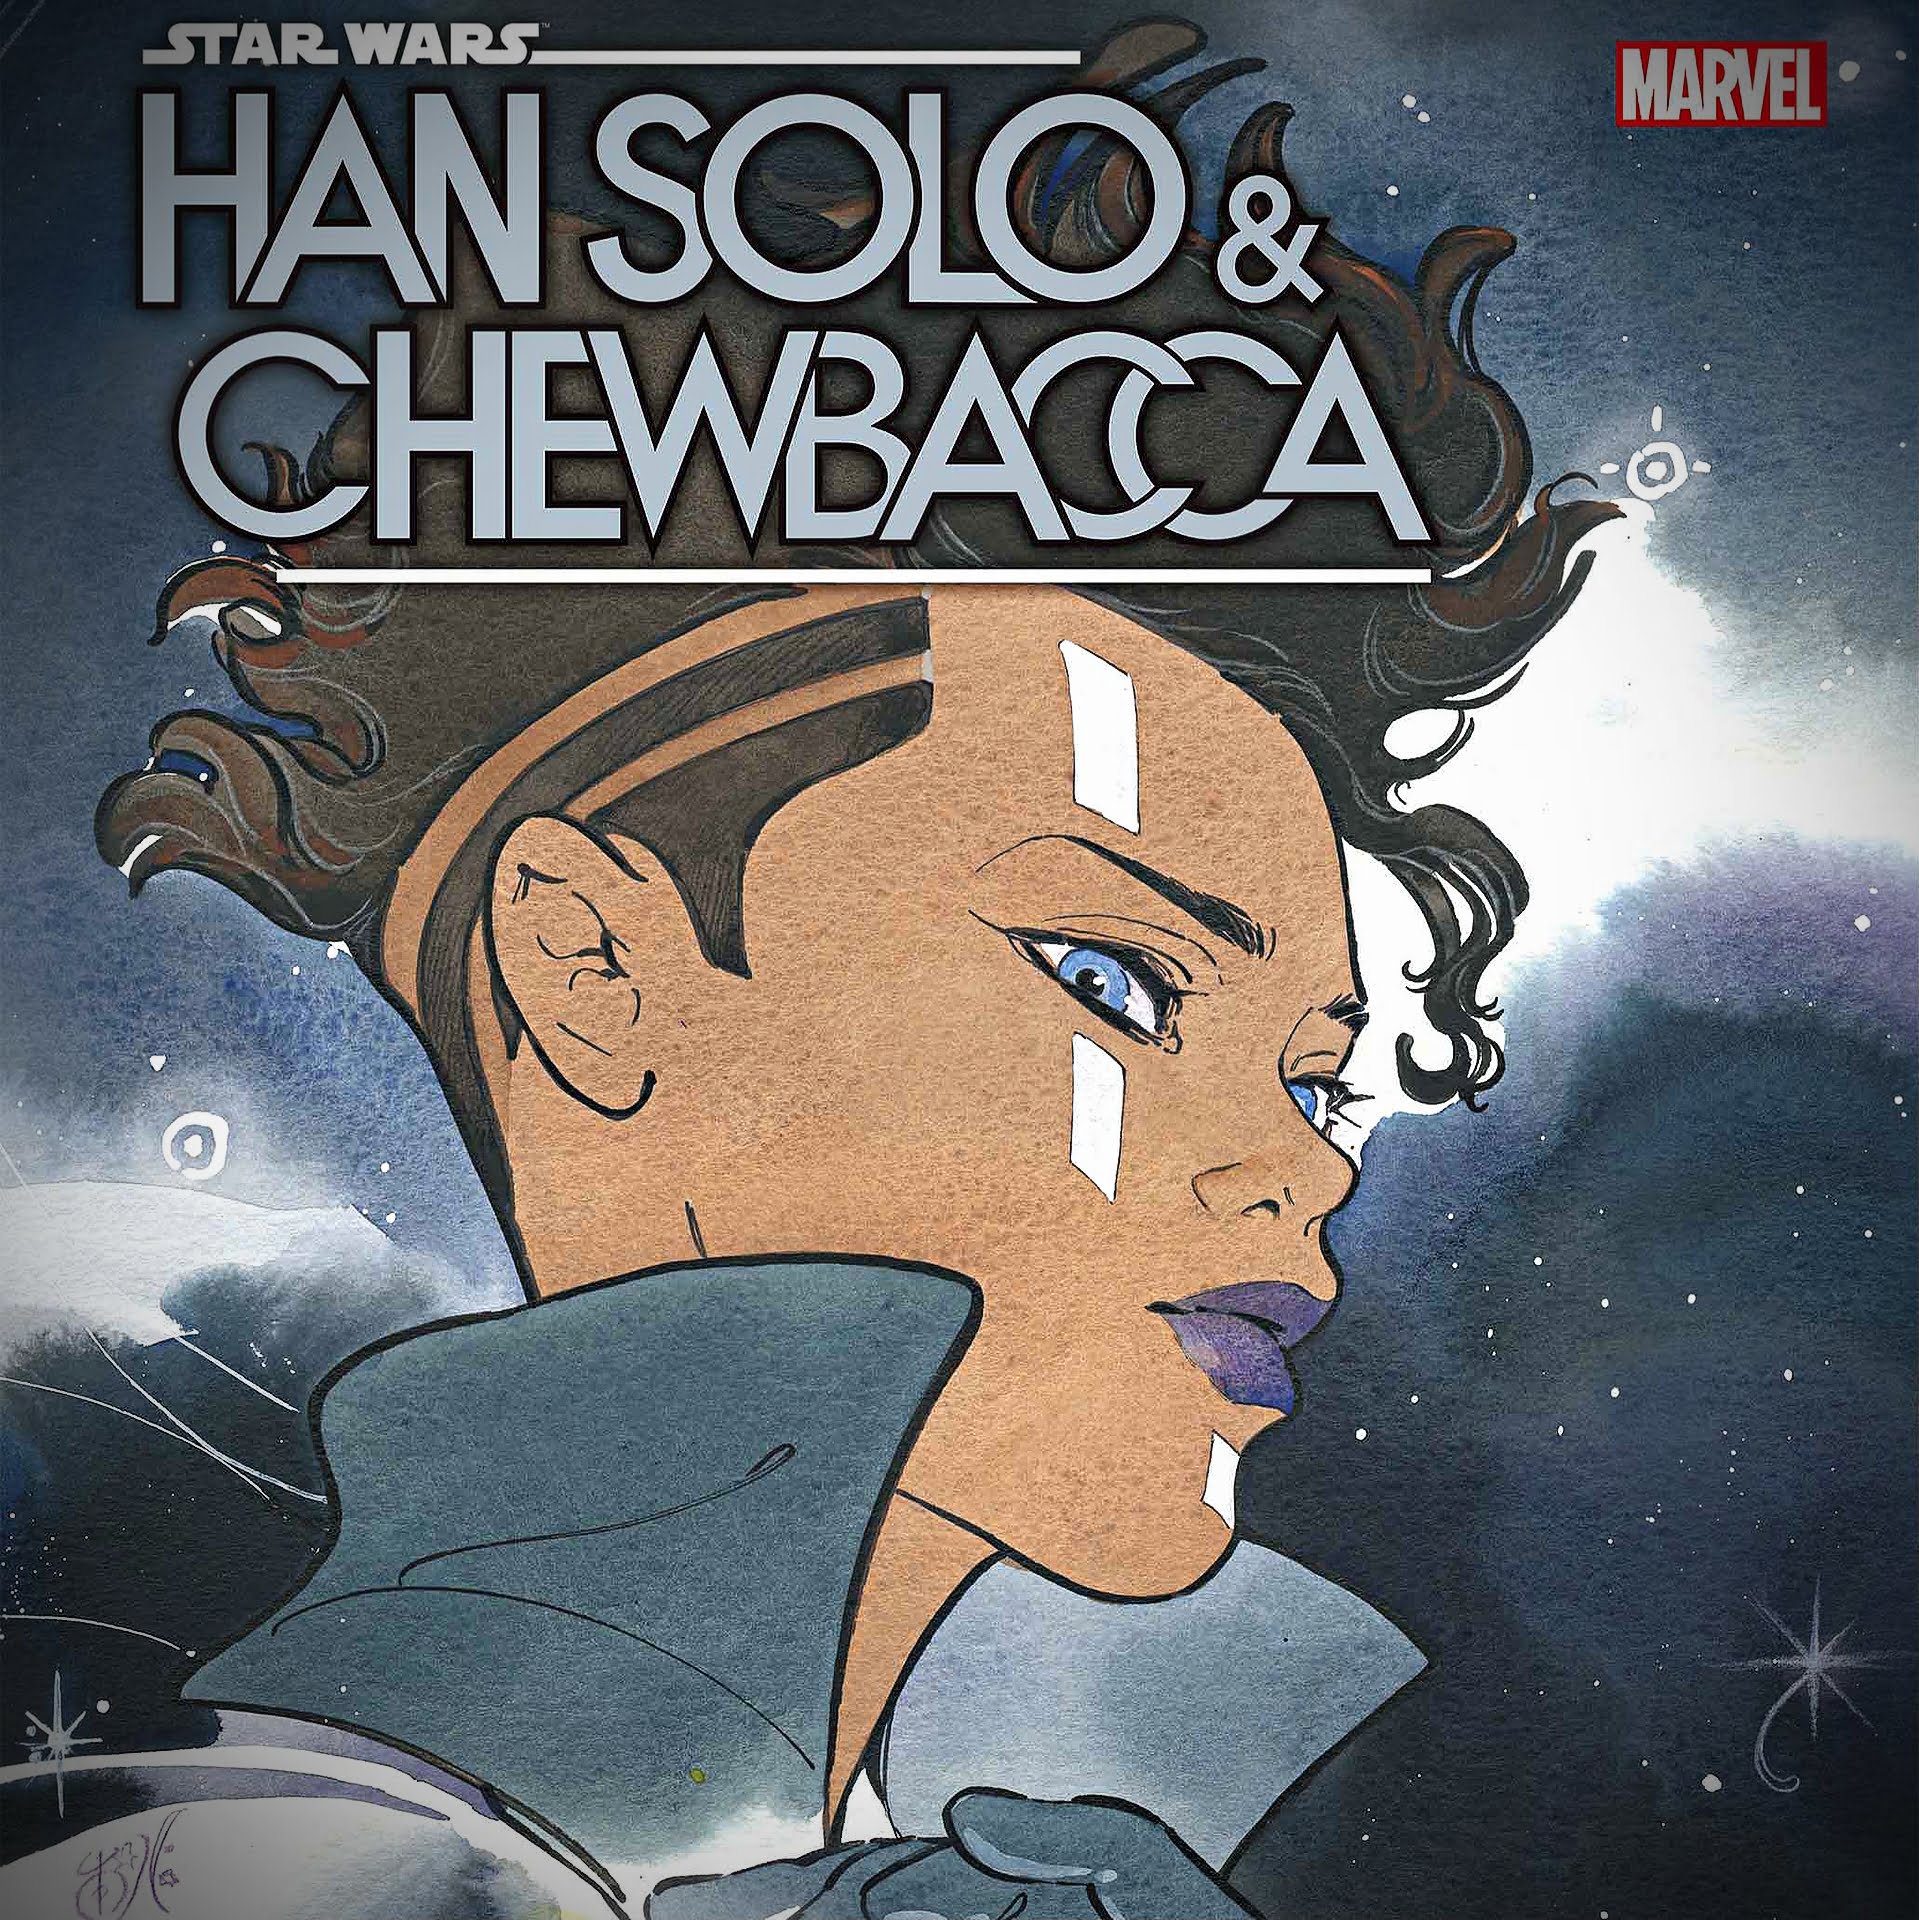 Star Wars and Marvel's women's history month via 360 Magazine.